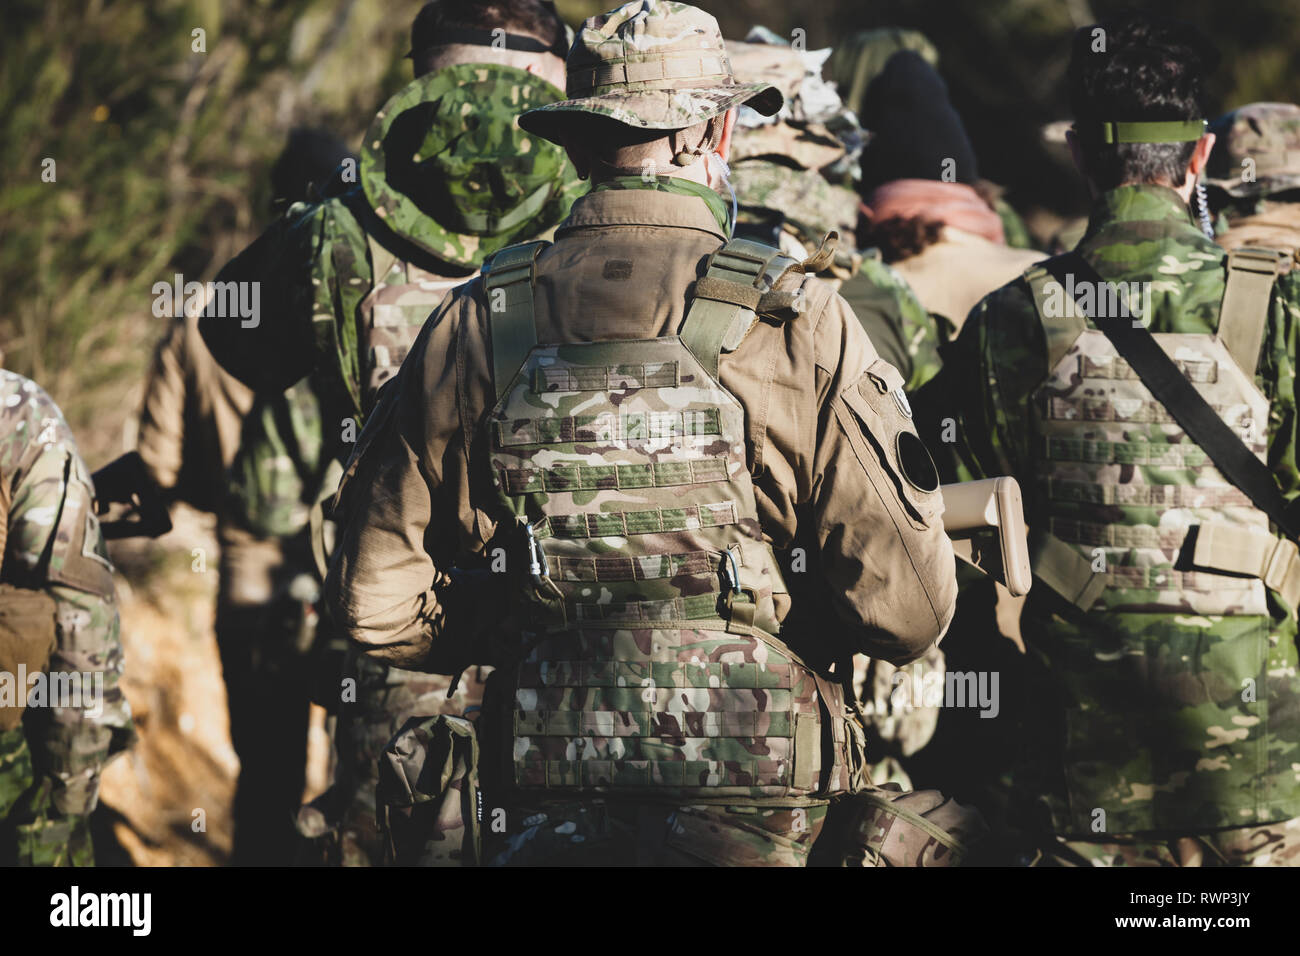 Airsoft military game players in camouflage uniform with armed assault rifle. Stock Photo